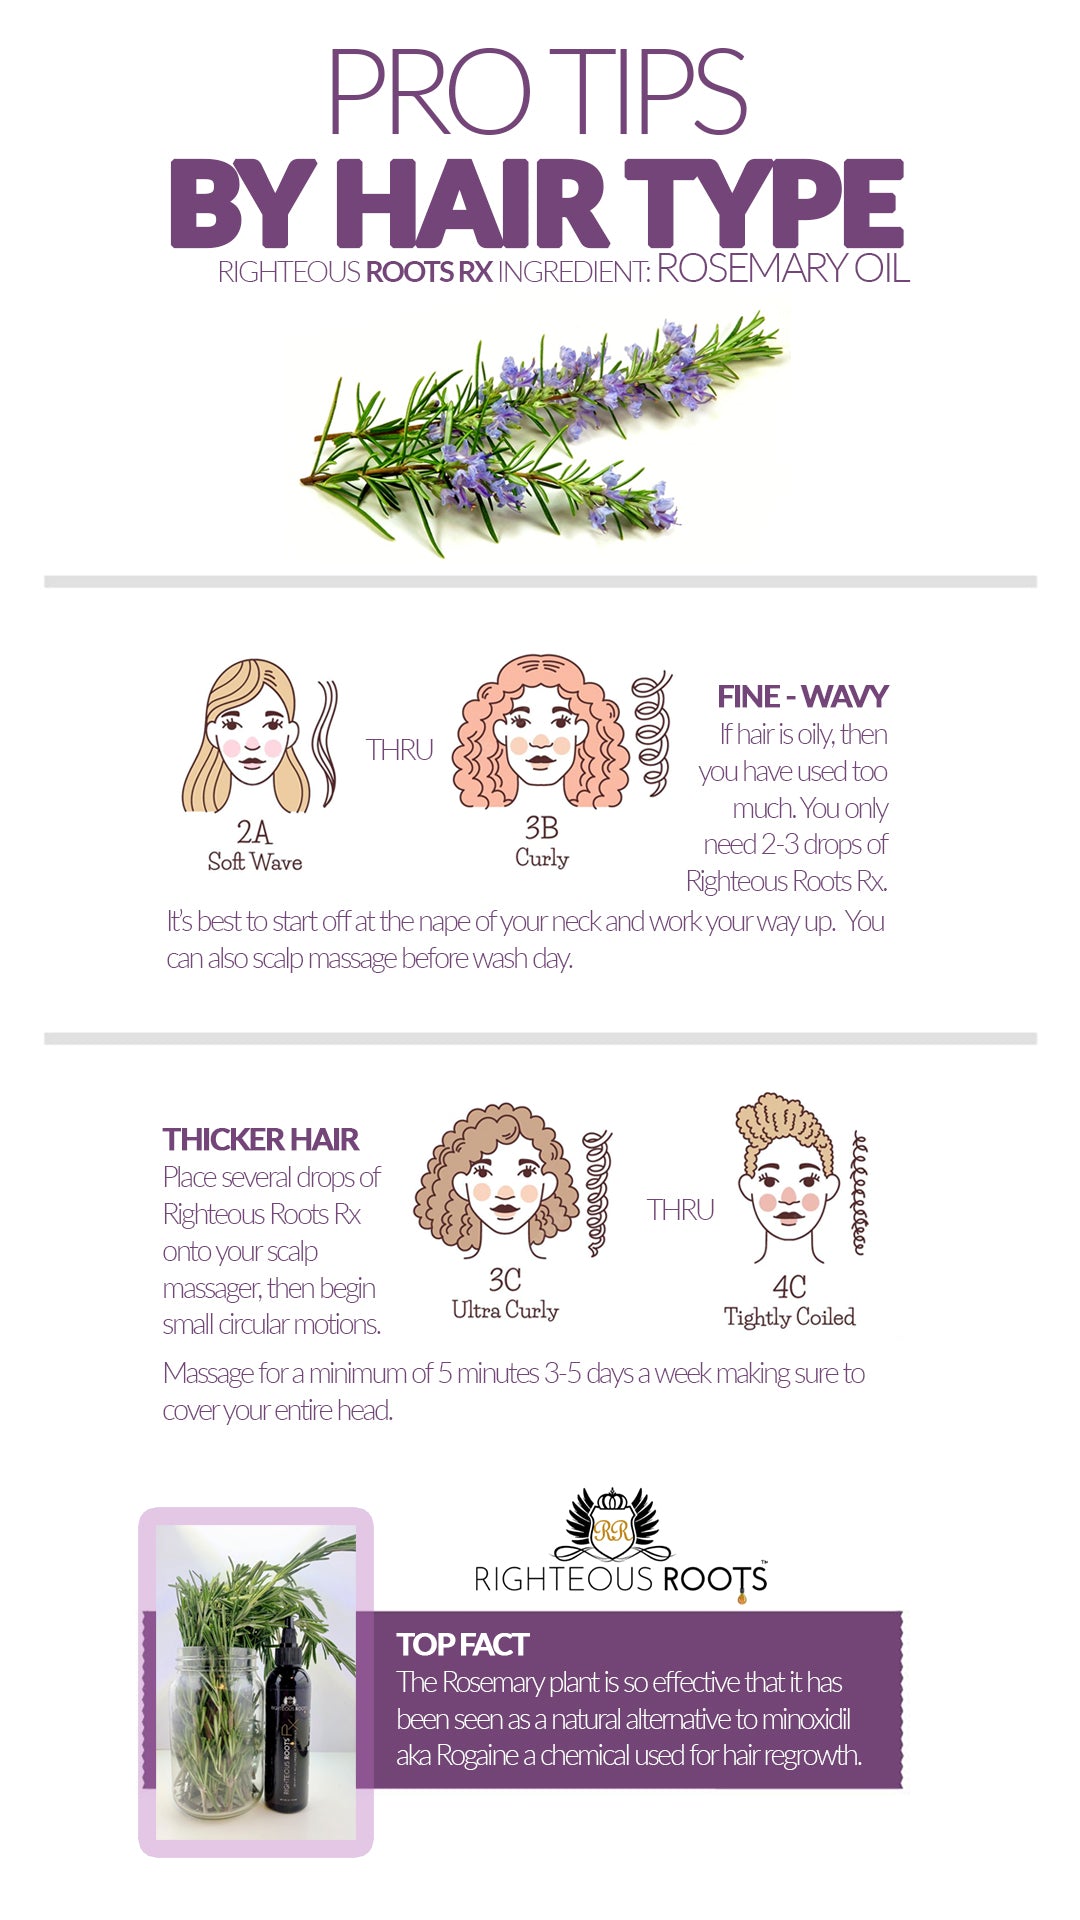 hair tips for all hair types, rosemary oil for hair growth, righteous roots